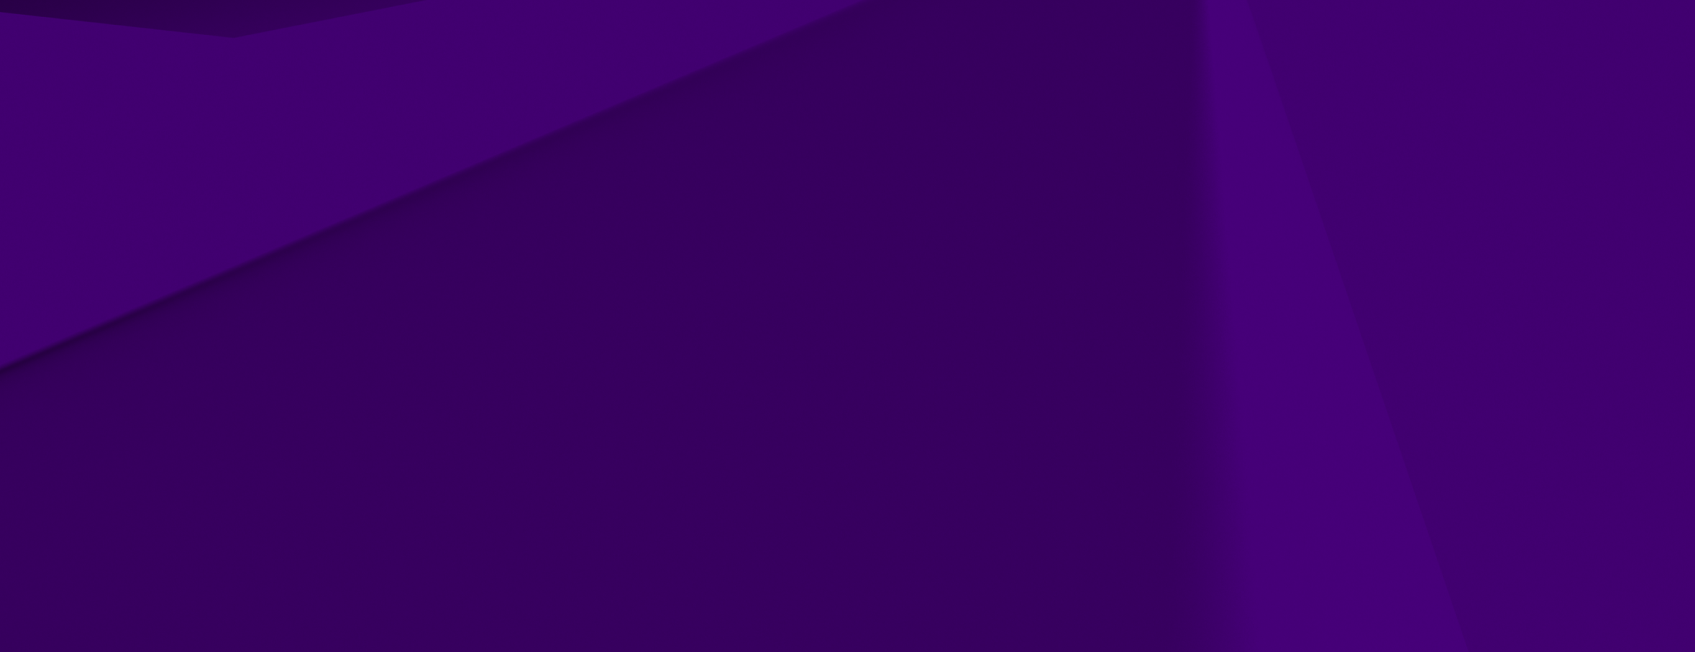 rra-microsite-divide-and-dividends-purple-background-logo.png